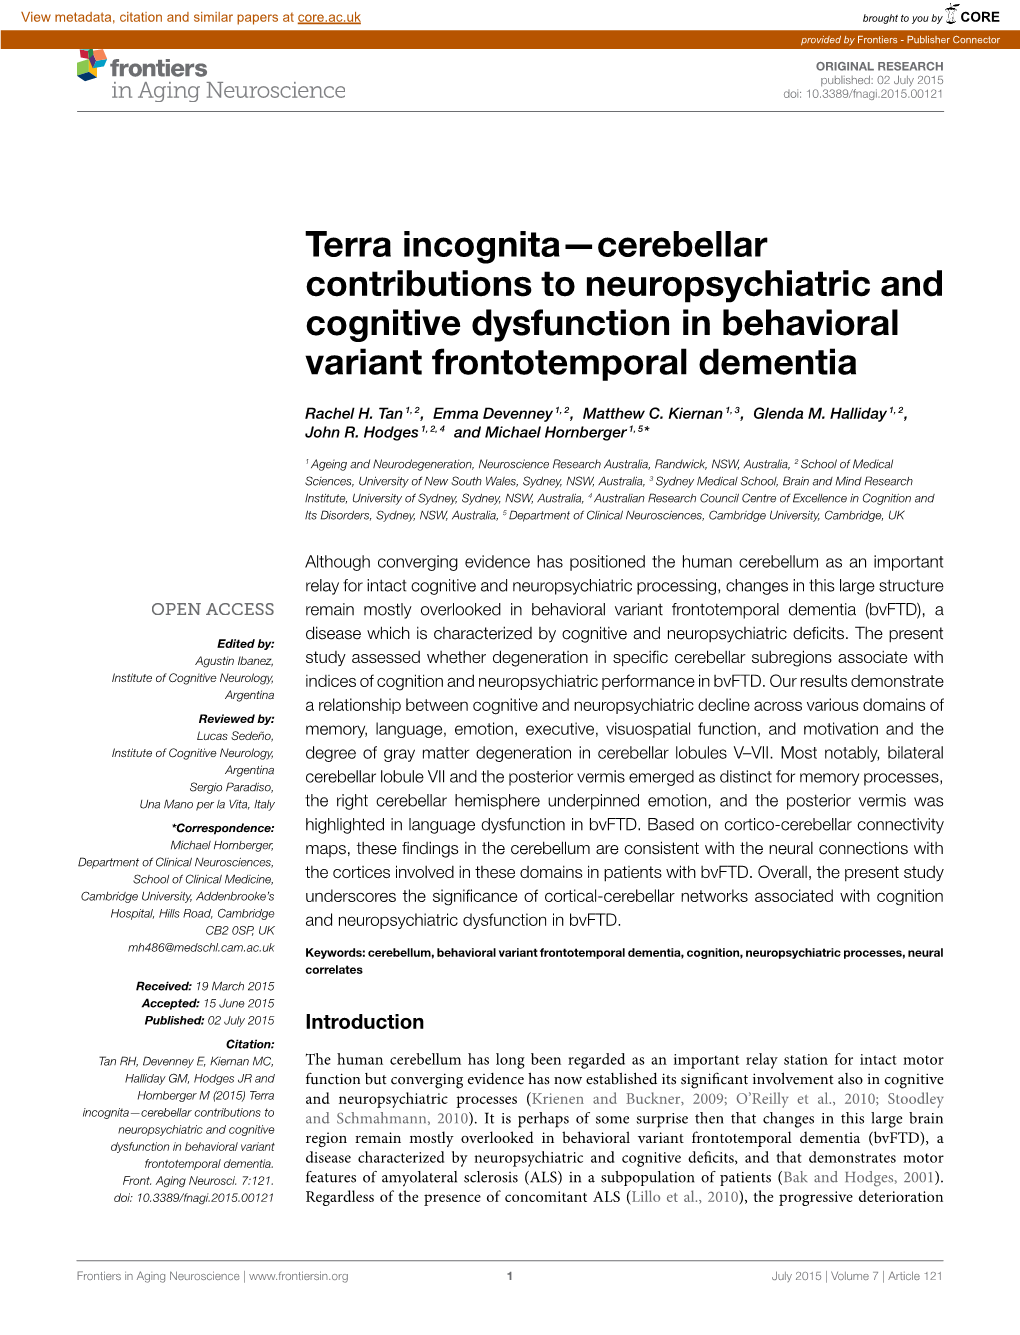 Terra Incognita—Cerebellar Contributions to Neuropsychiatric and Cognitive Dysfunction in Behavioral Variant Frontotemporal Dementia